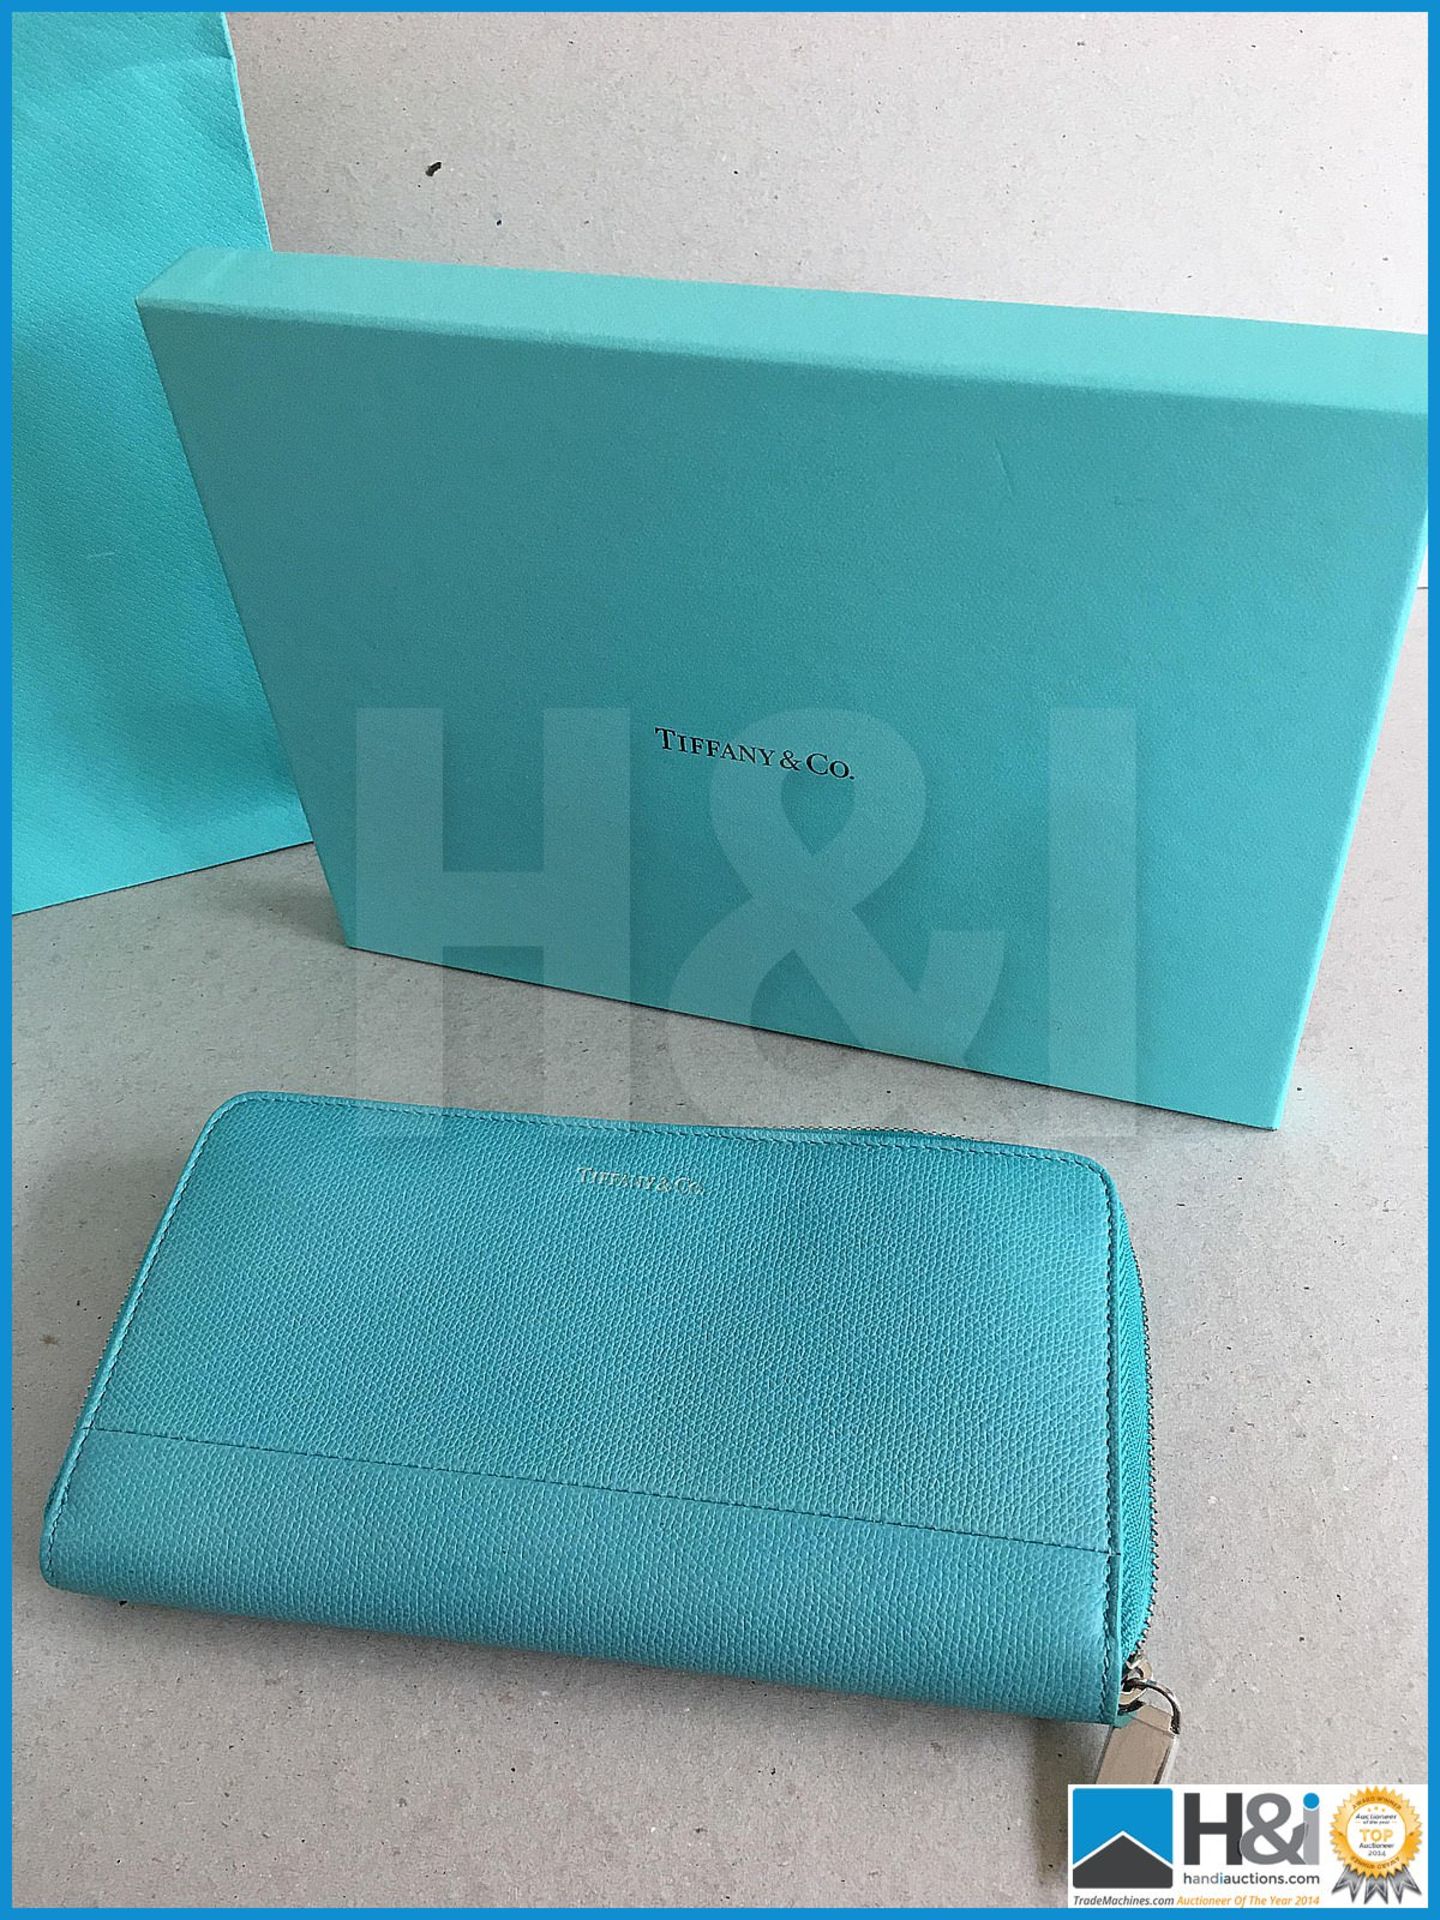 Genuine Tiffany & Co Purse / Wallet in Robins Egg Blue completely unused still with card protectors - Image 6 of 11